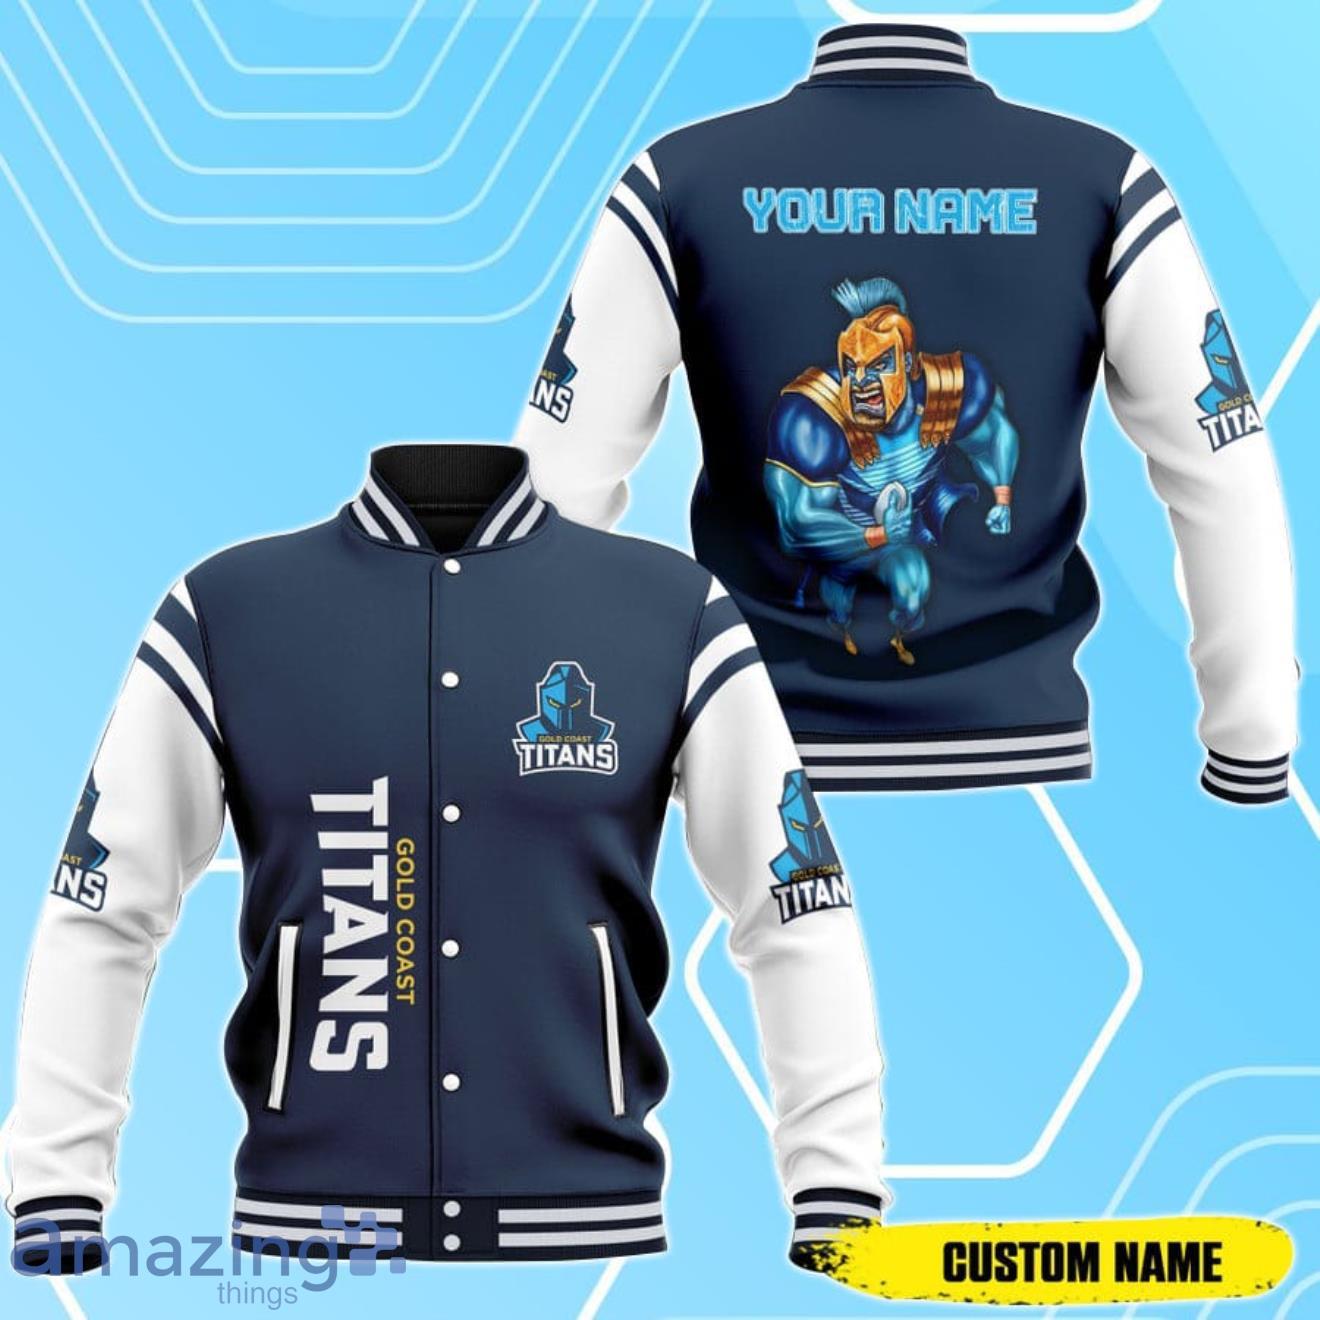 Customized Varsity Jackets  Customized T-shirts, Hoodies, Sports Jerseys  and Accessories